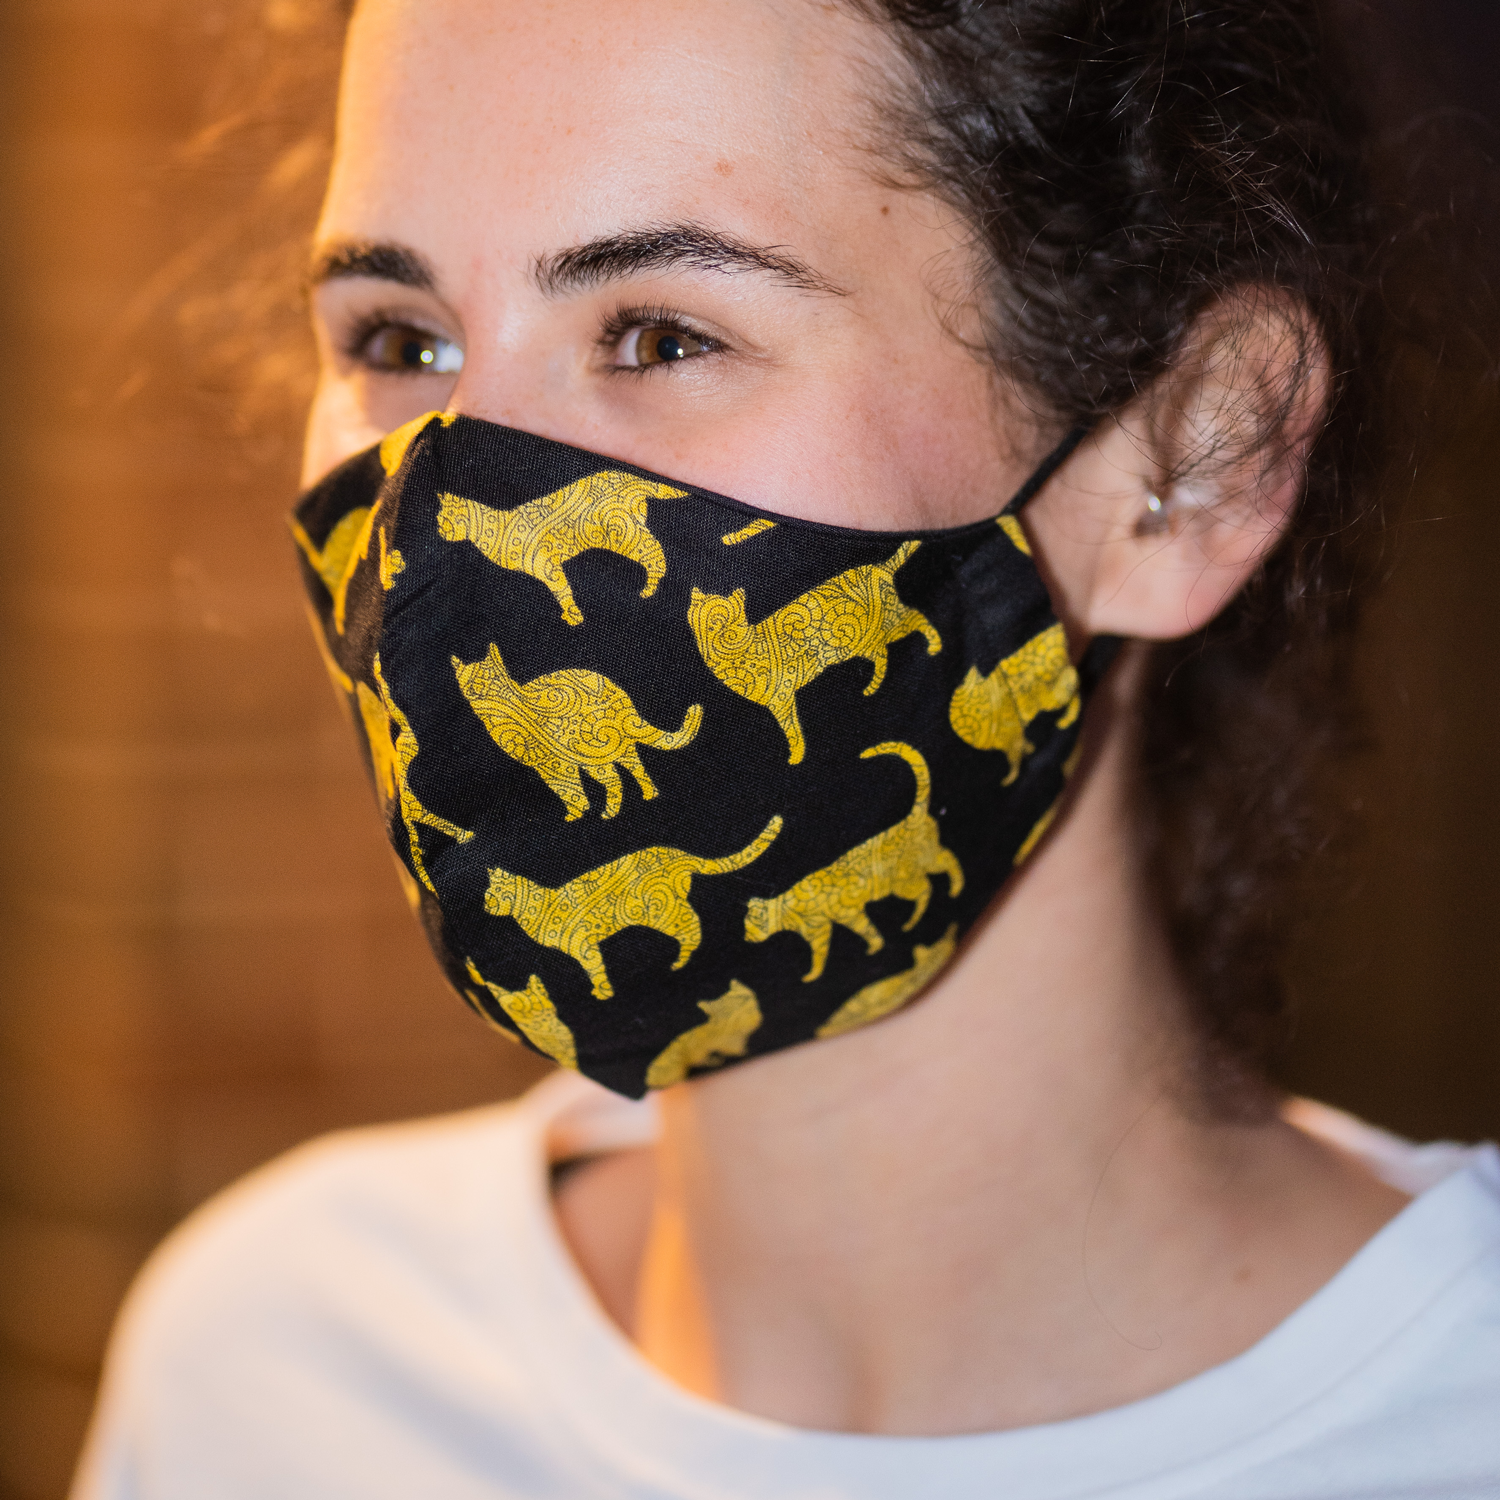 Triple layered face mask made in Melbourne Australia from cotton and poplin featuring a unique cat print